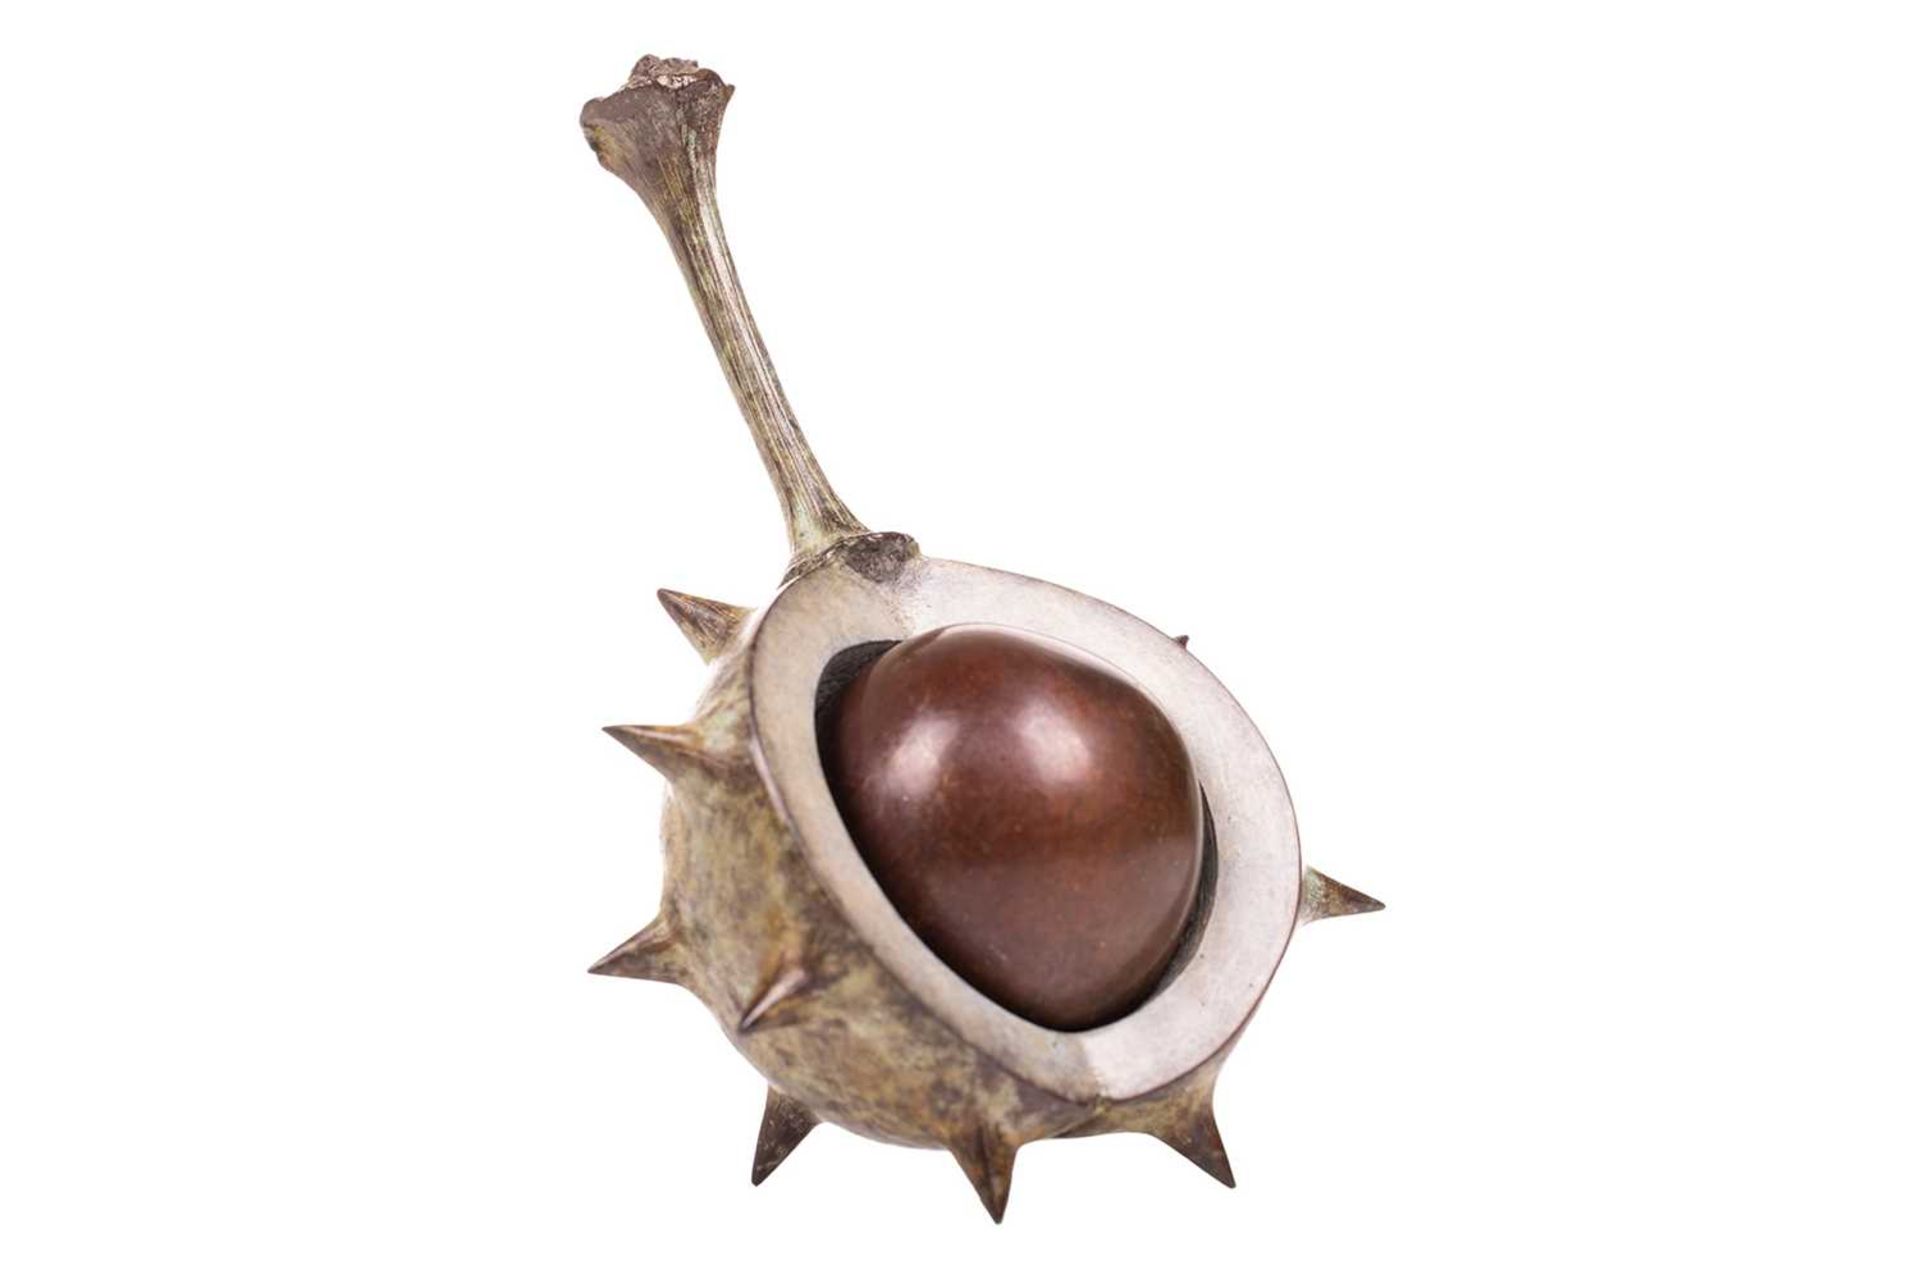 Mark Hall (b.1970), 'Self Harm' (Popping Out), bronze study of a conker in a half-opened casing, 11 